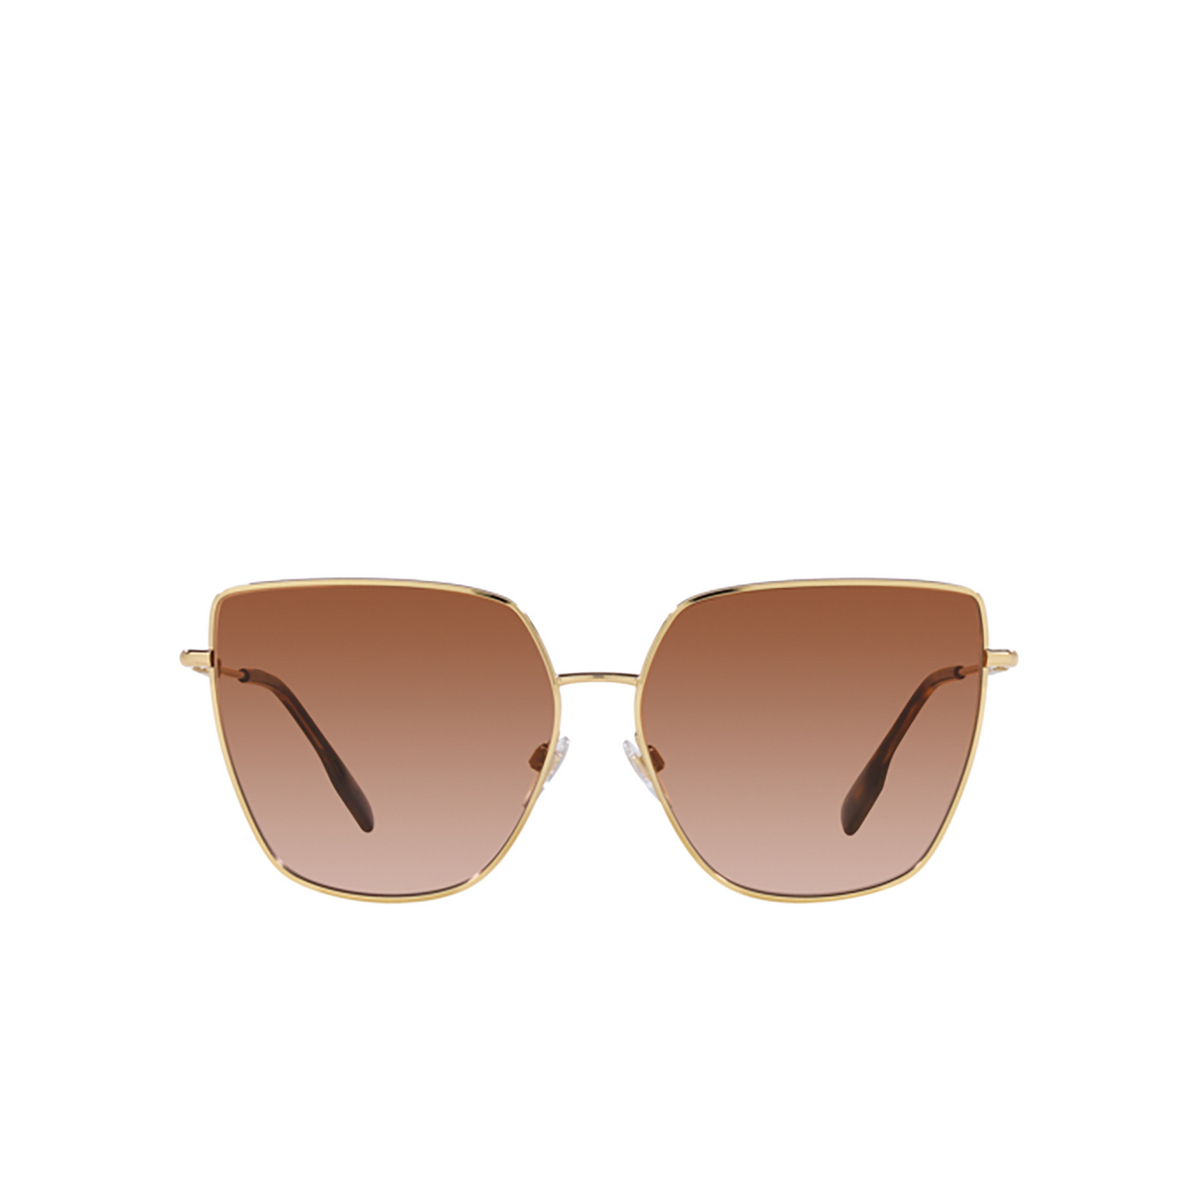 Burberry ALEXIS Sunglasses 110913 Light Gold - front view